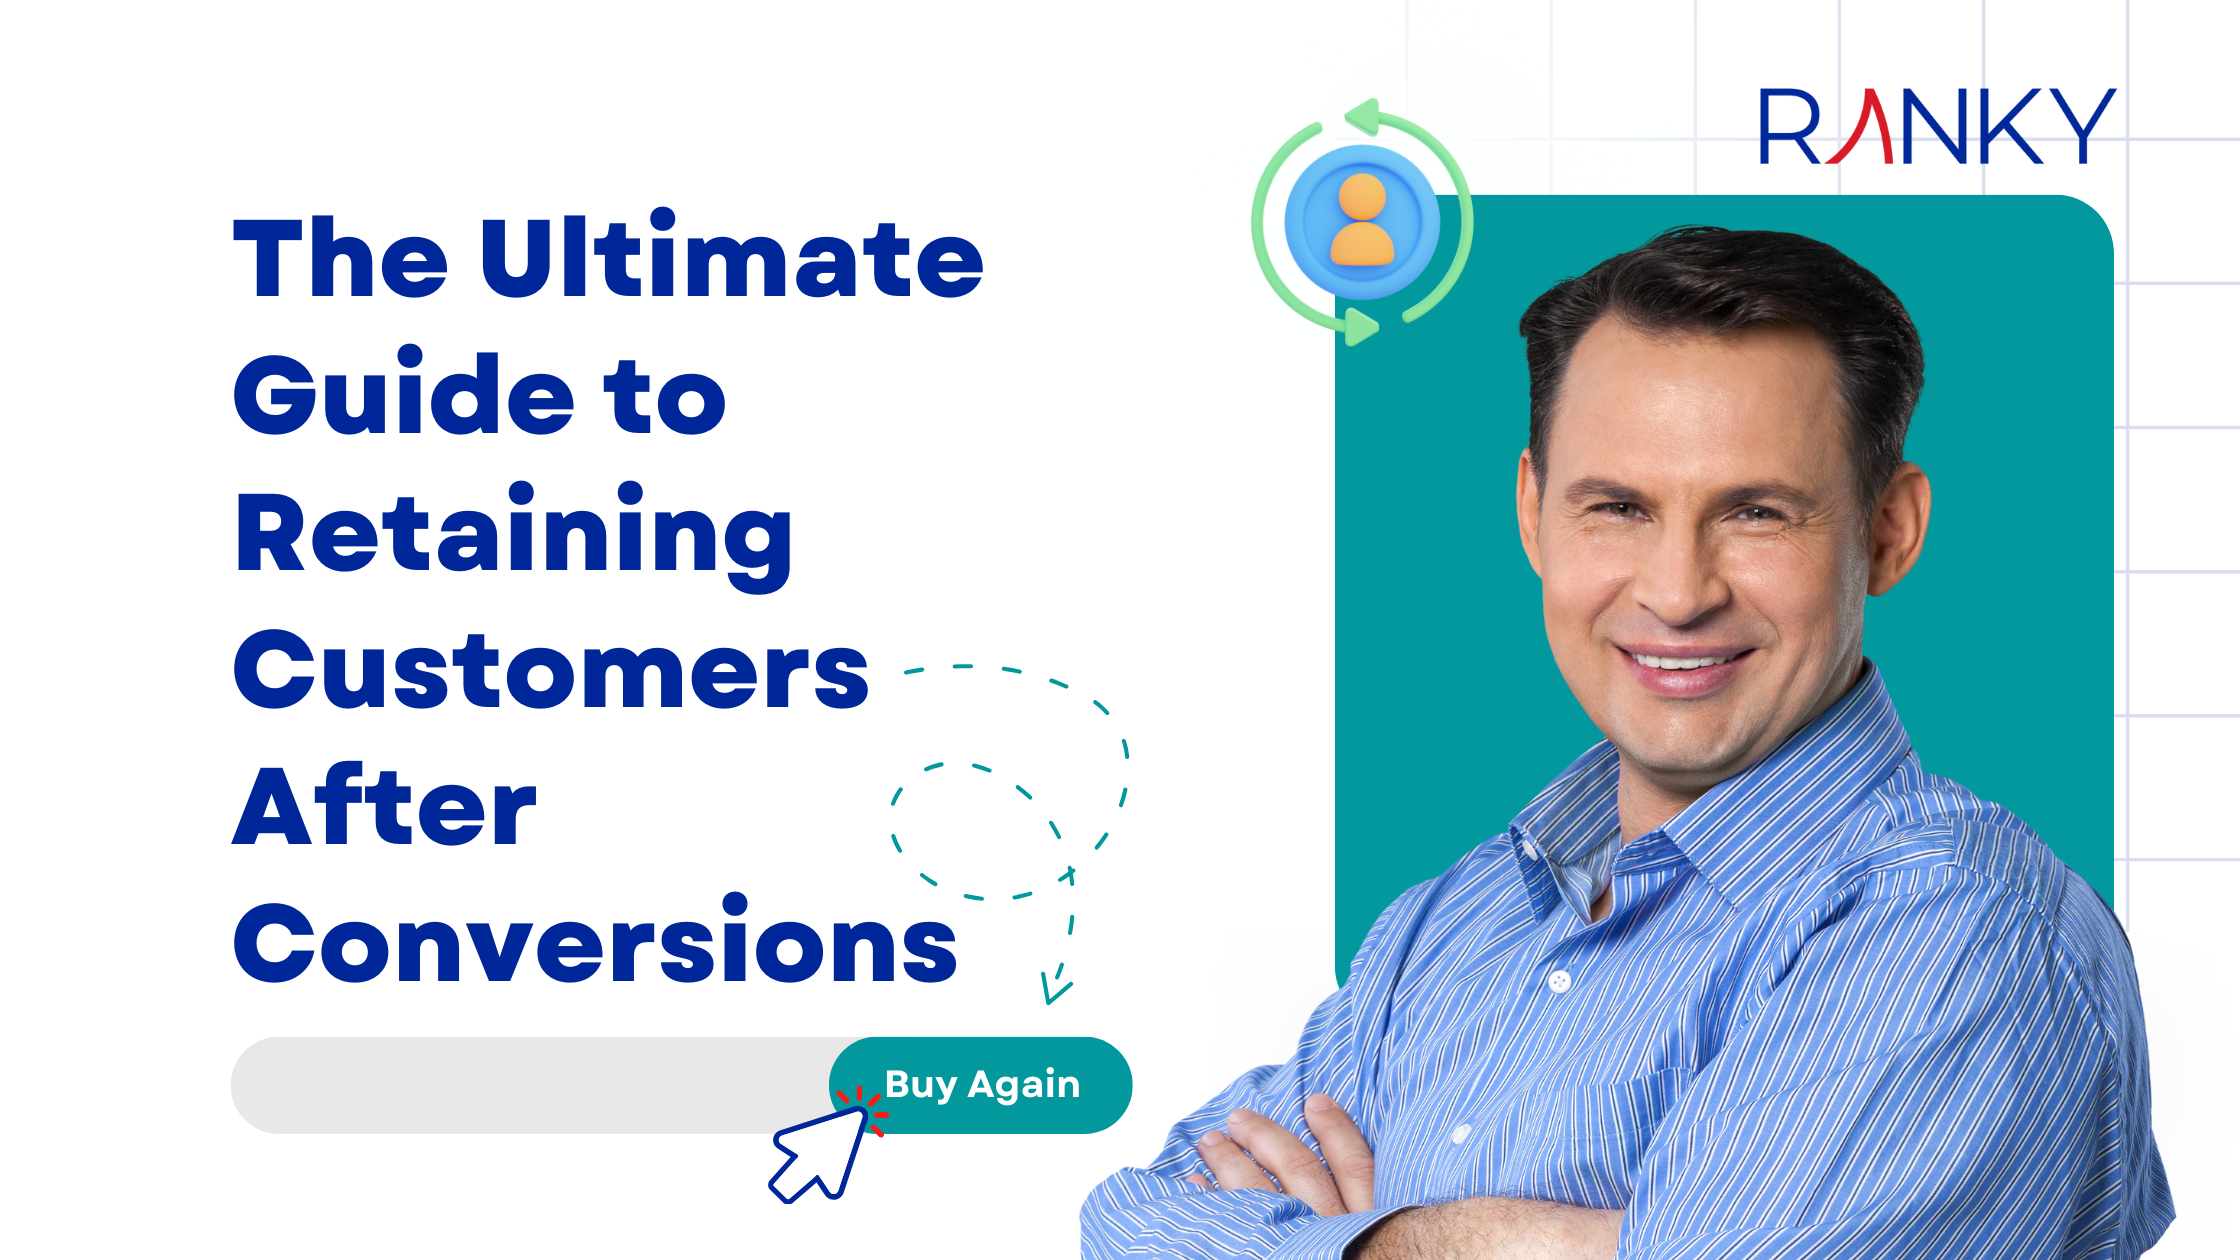 The Ultimate Guide to Retaining Customers After Conversions